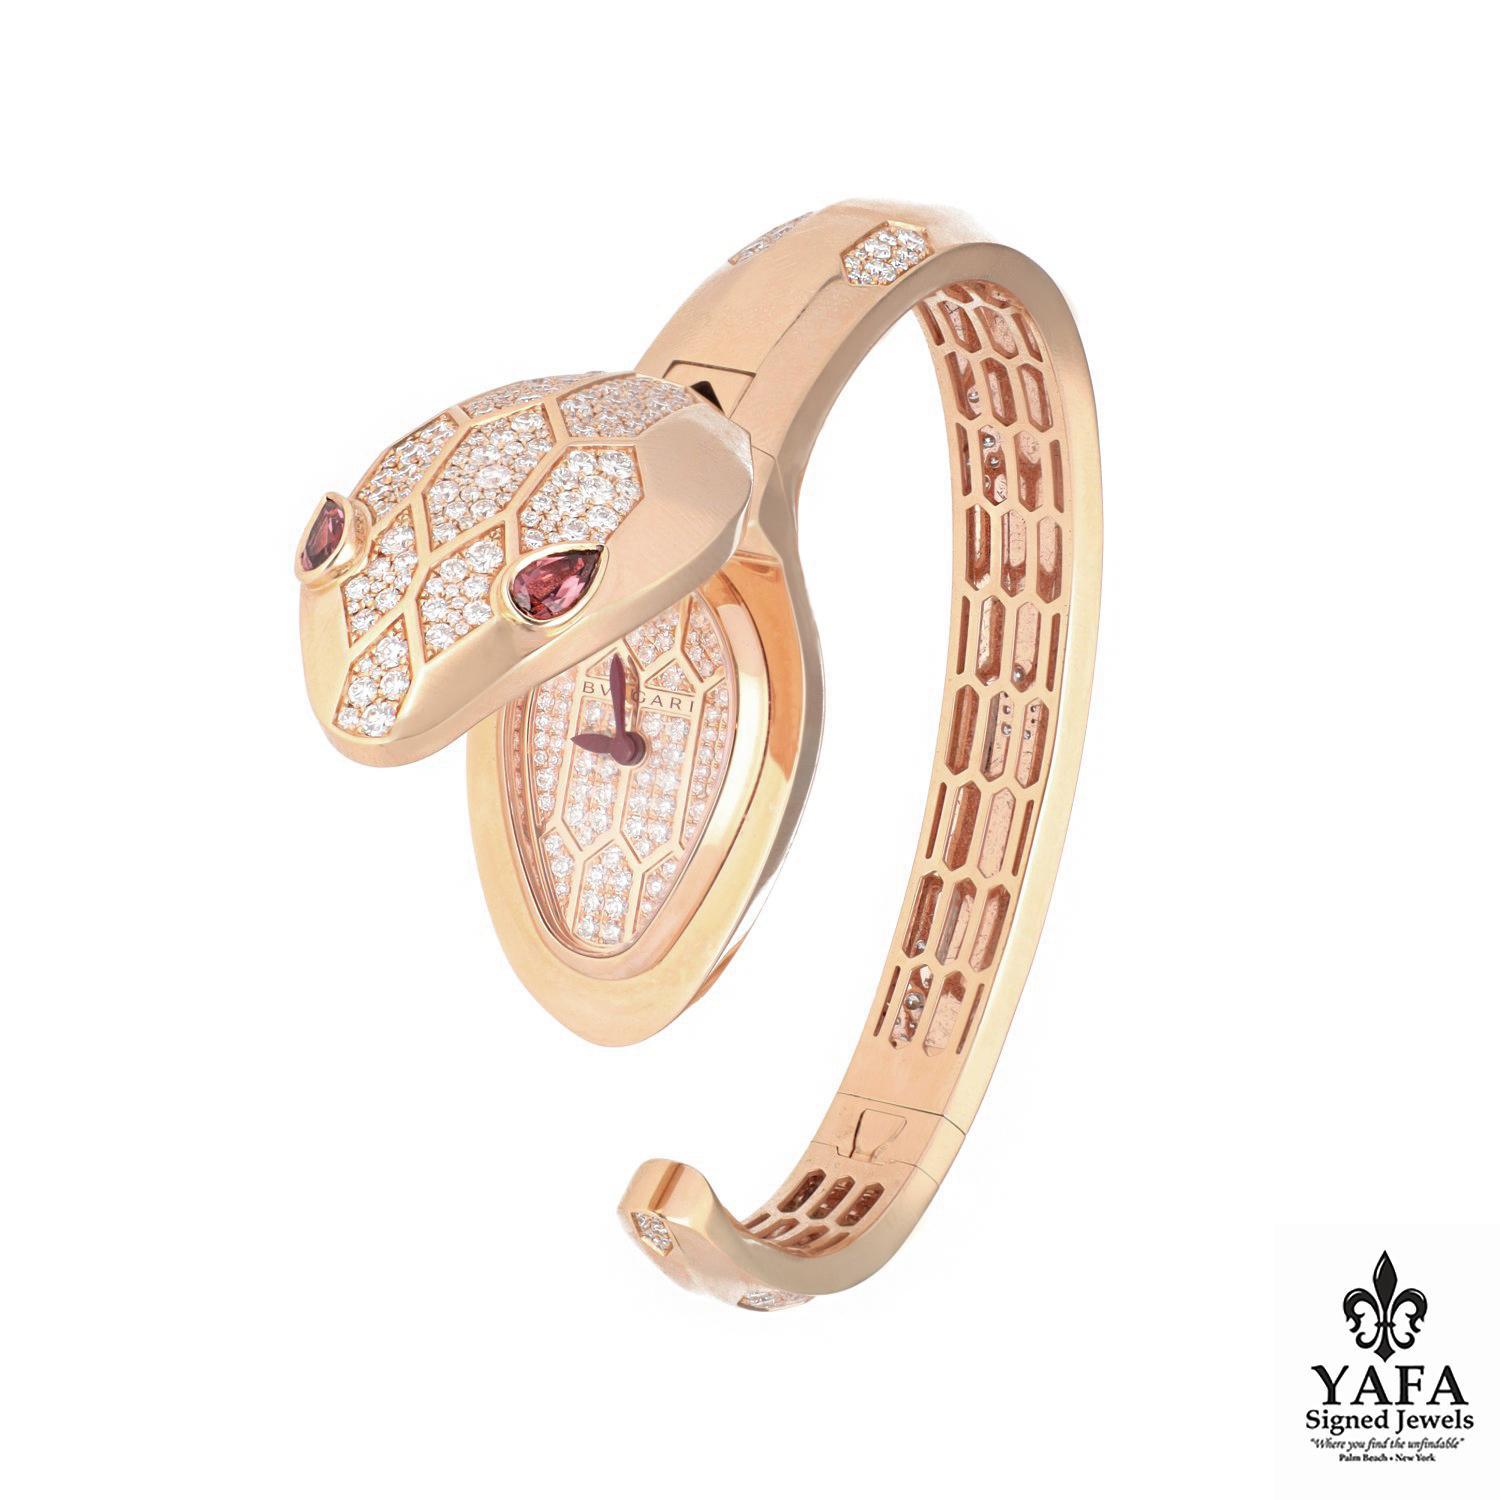 Bulgari 18K Rose Gold Serpenti Misteriosi Watch In Excellent Condition For Sale In New York, NY